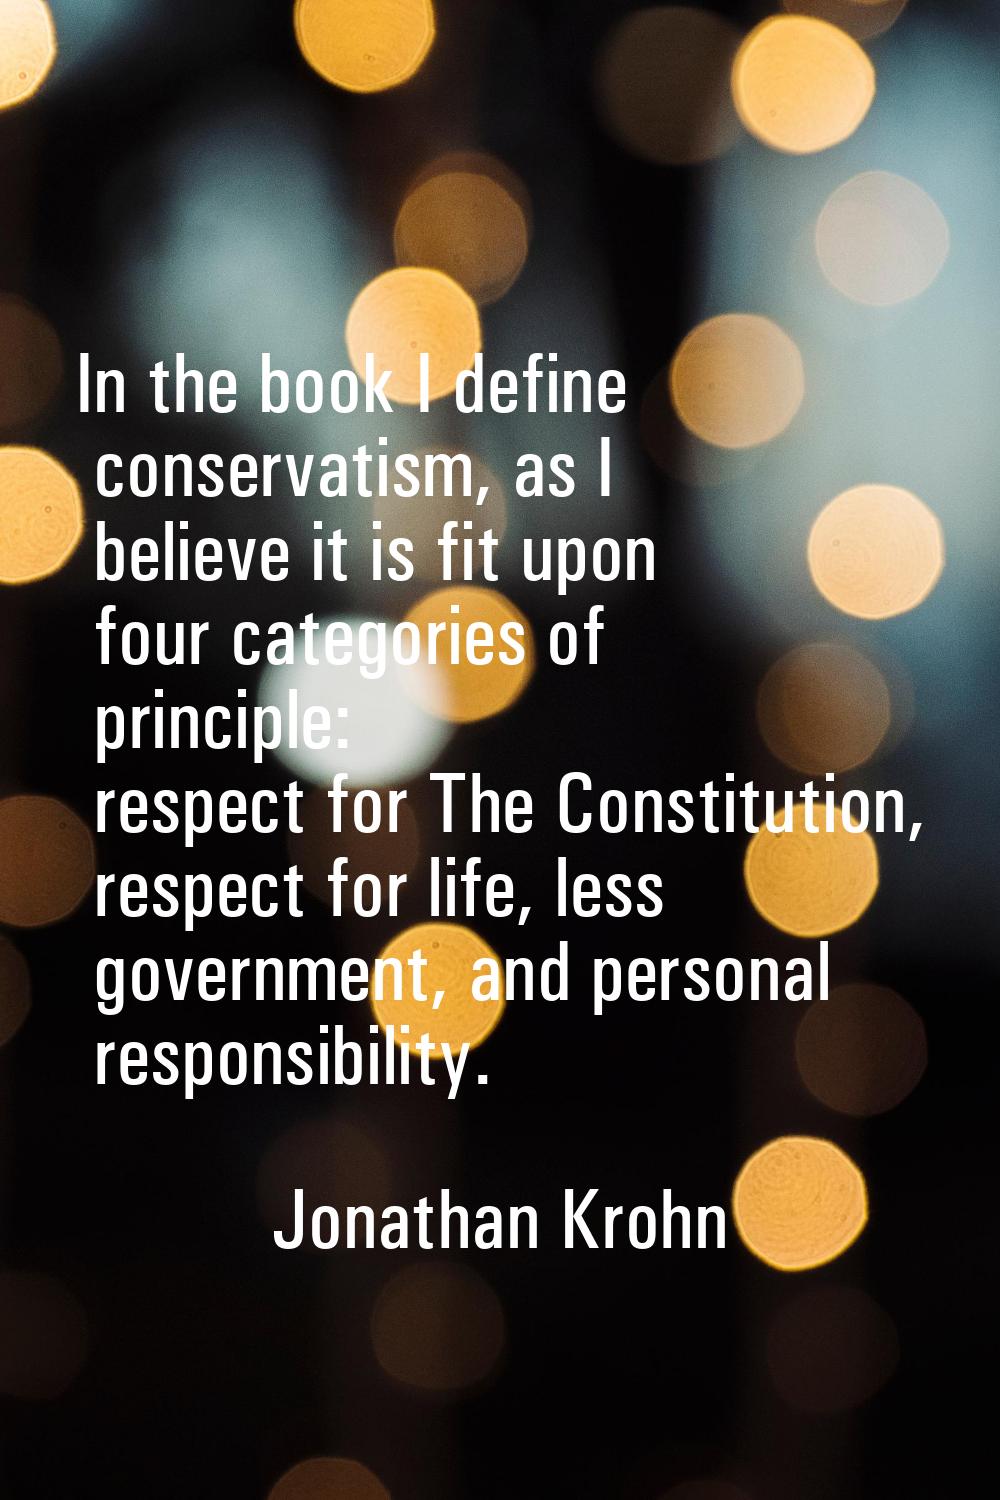 In the book I define conservatism, as I believe it is fit upon four categories of principle: respec